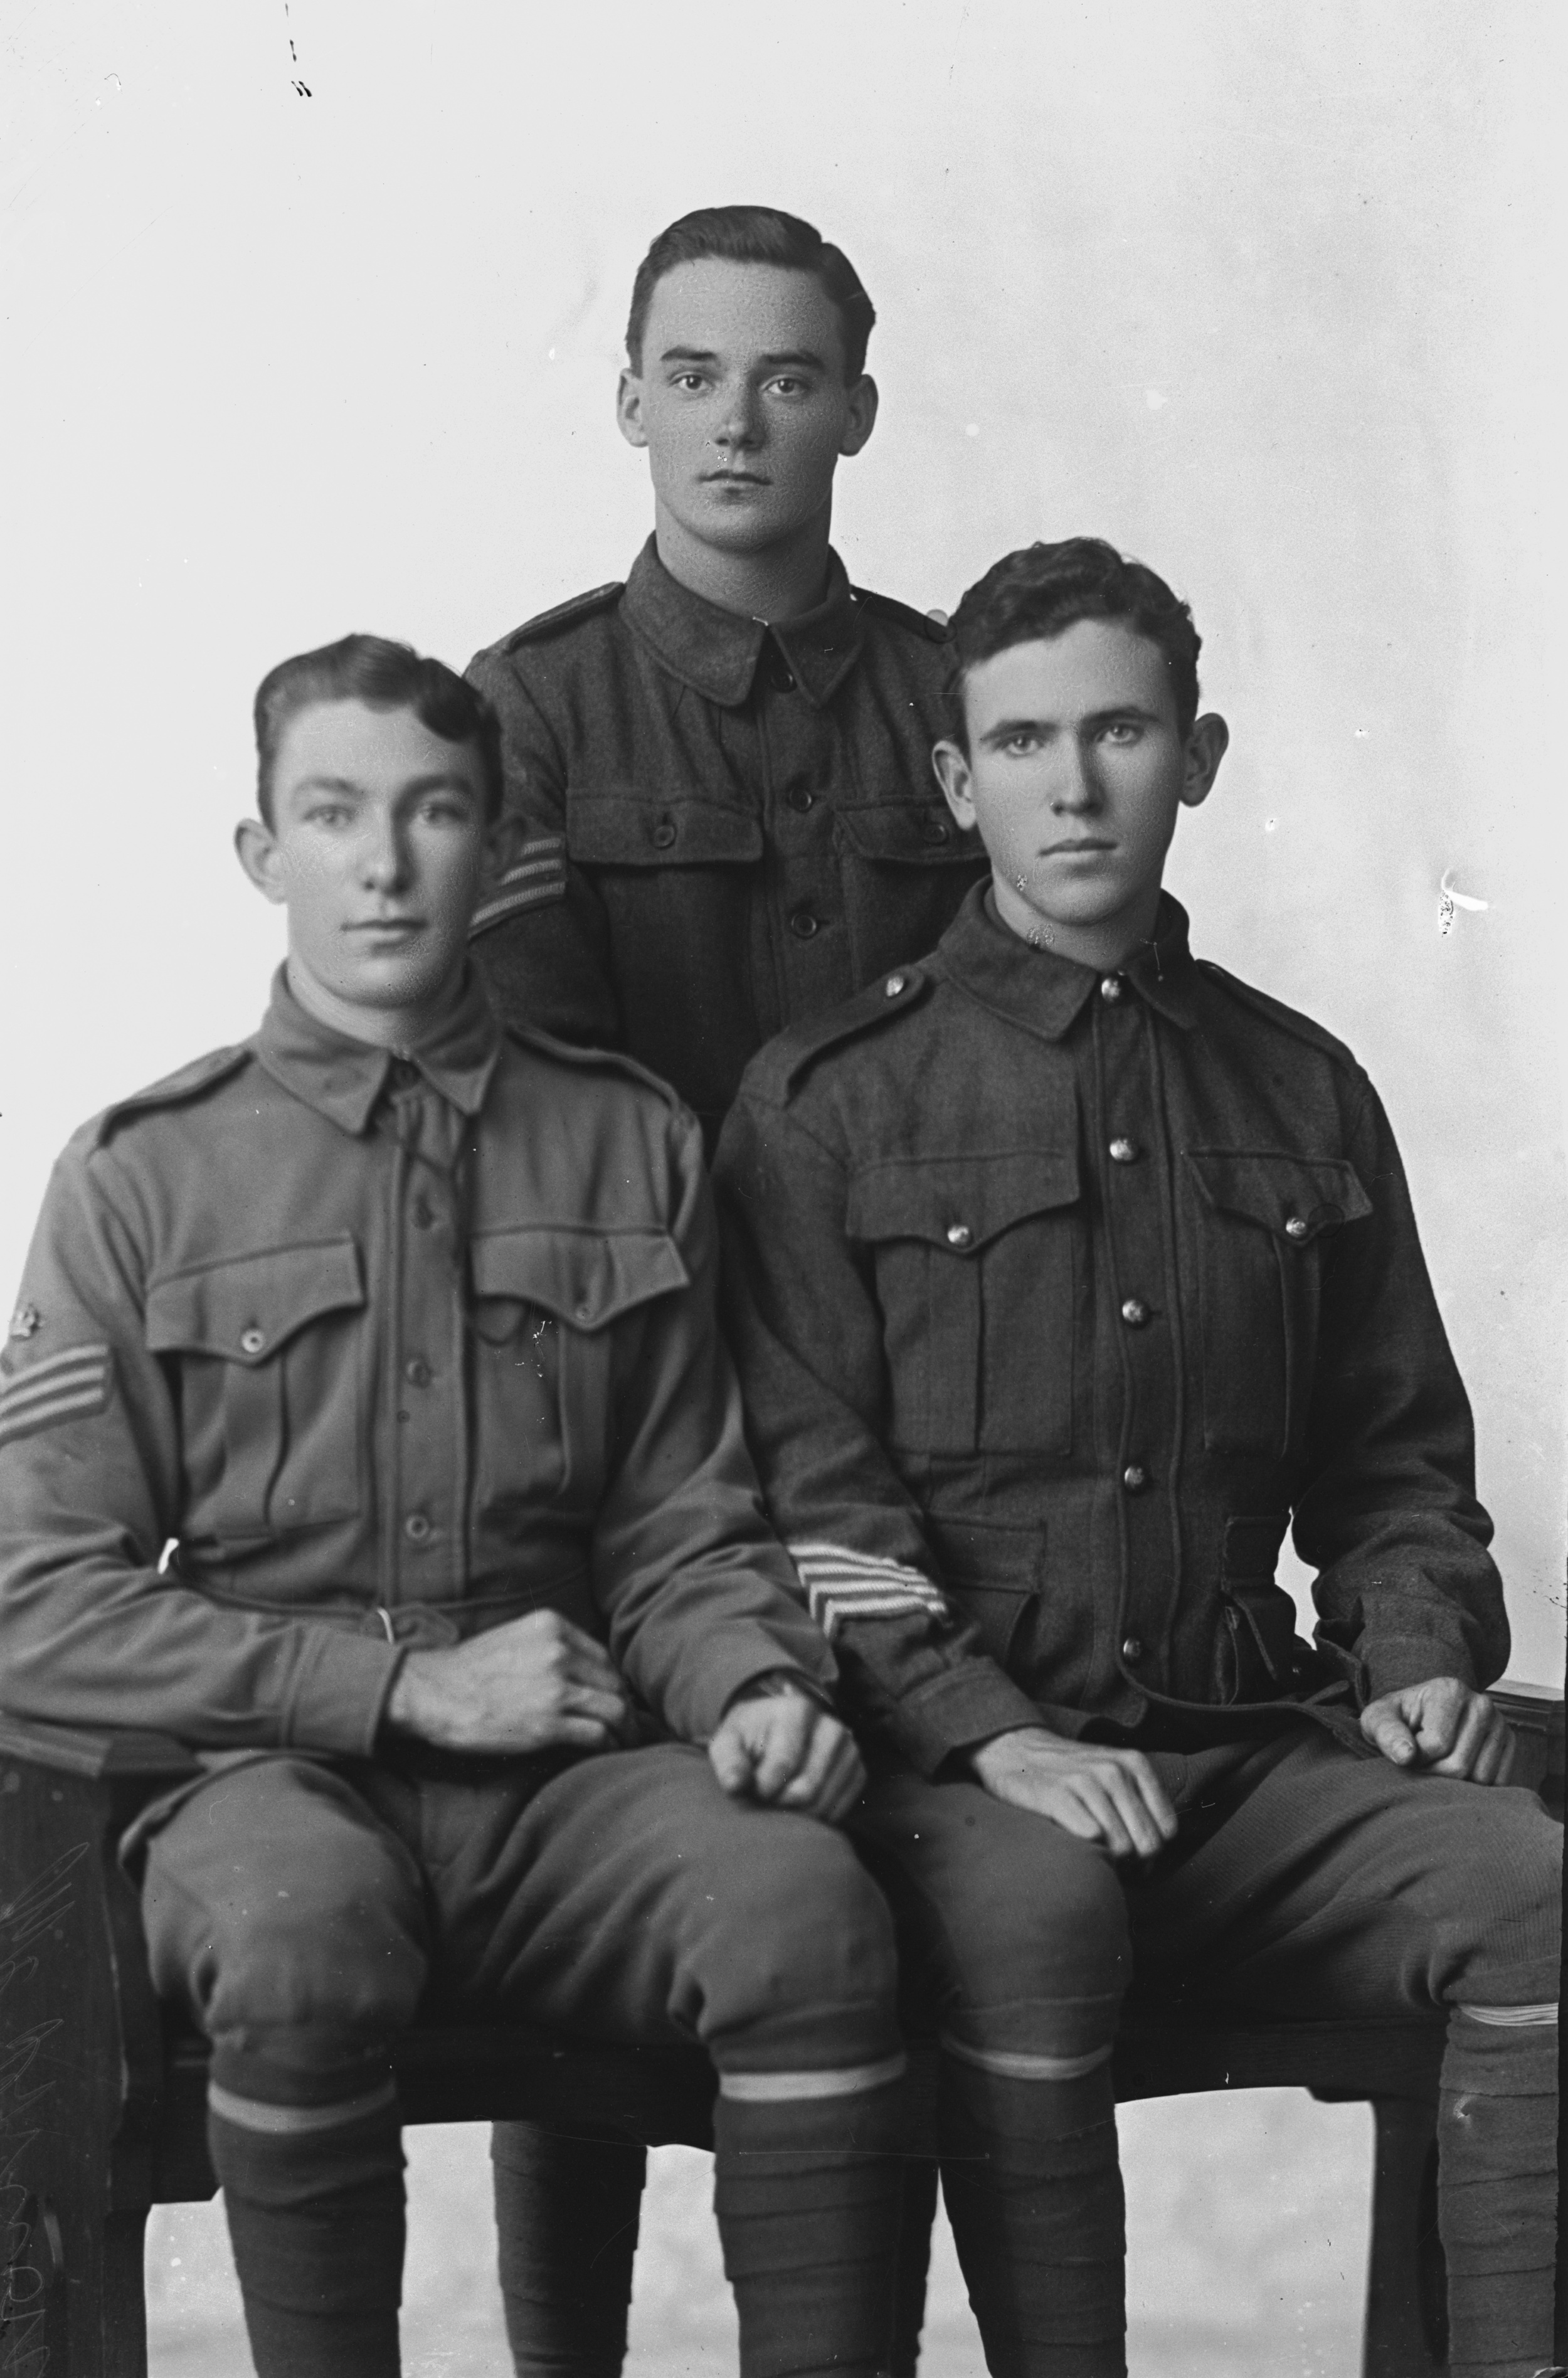 Photographed at the Dease Studio, 117 Barrack Street Perth WA Image courtesy of the State Library of Western Australia: 108578PD